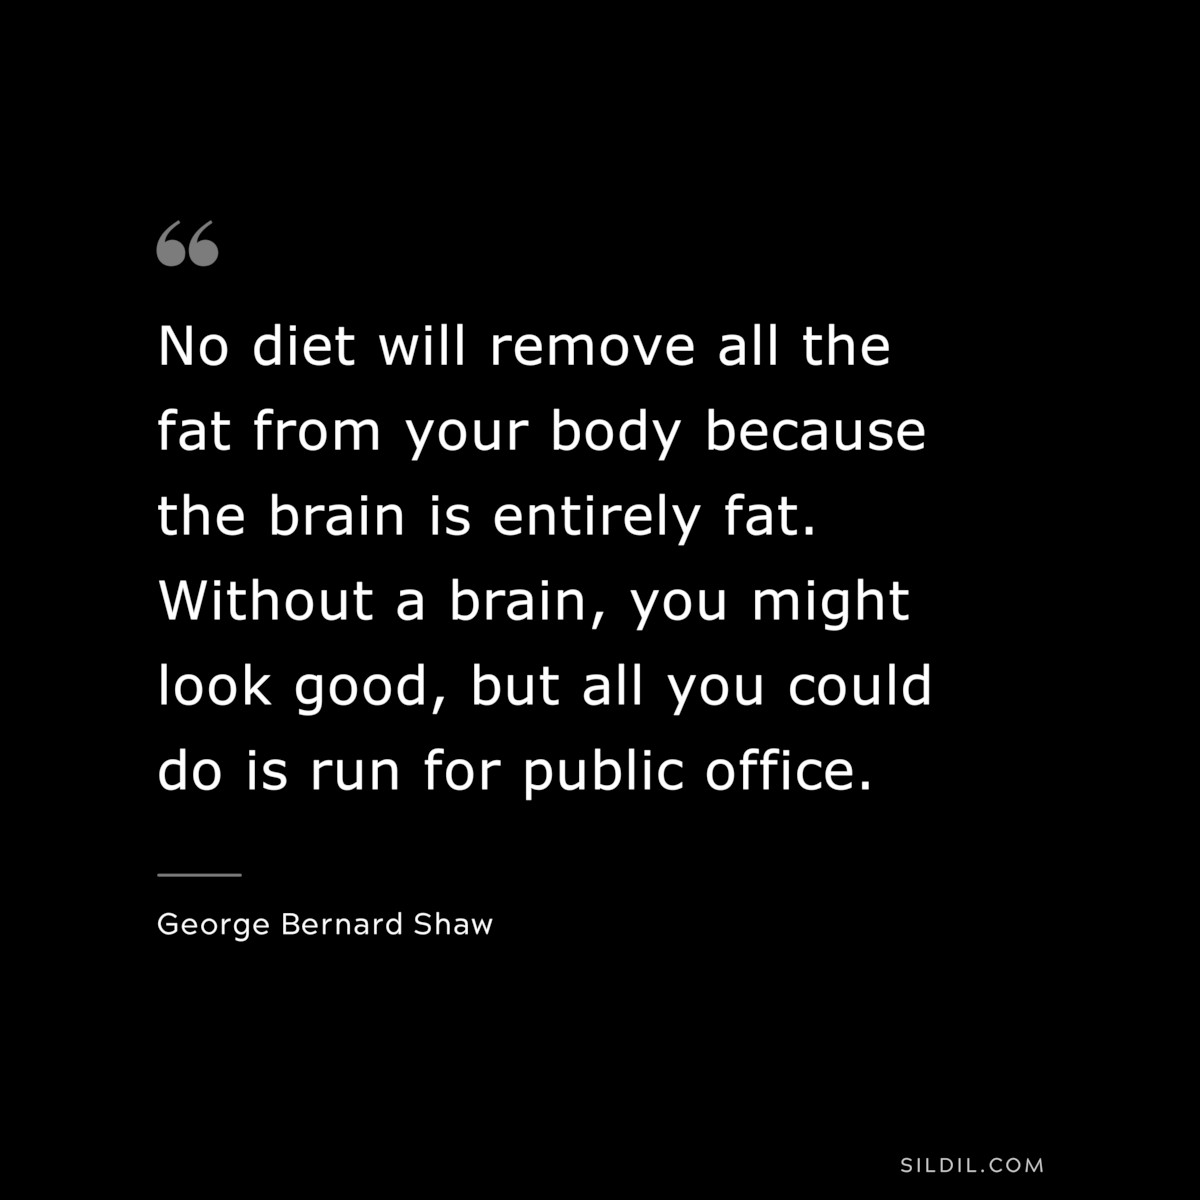 No diet will remove all the fat from your body because the brain is entirely fat. Without a brain, you might look good, but all you could do is run for public office. ― George Bernard Shaw